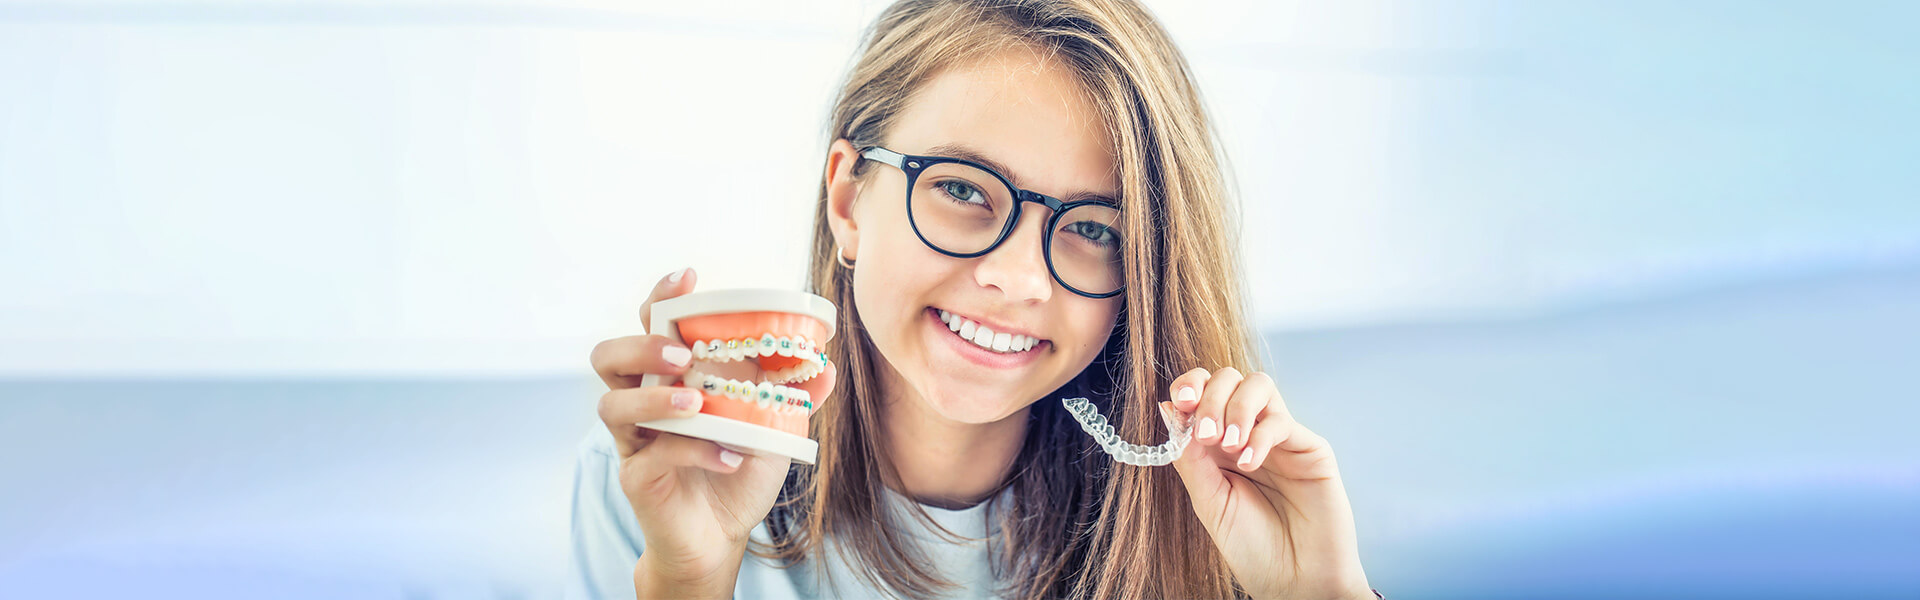 Dealing with Misaligned Teeth? Experience the Invisalign Difference